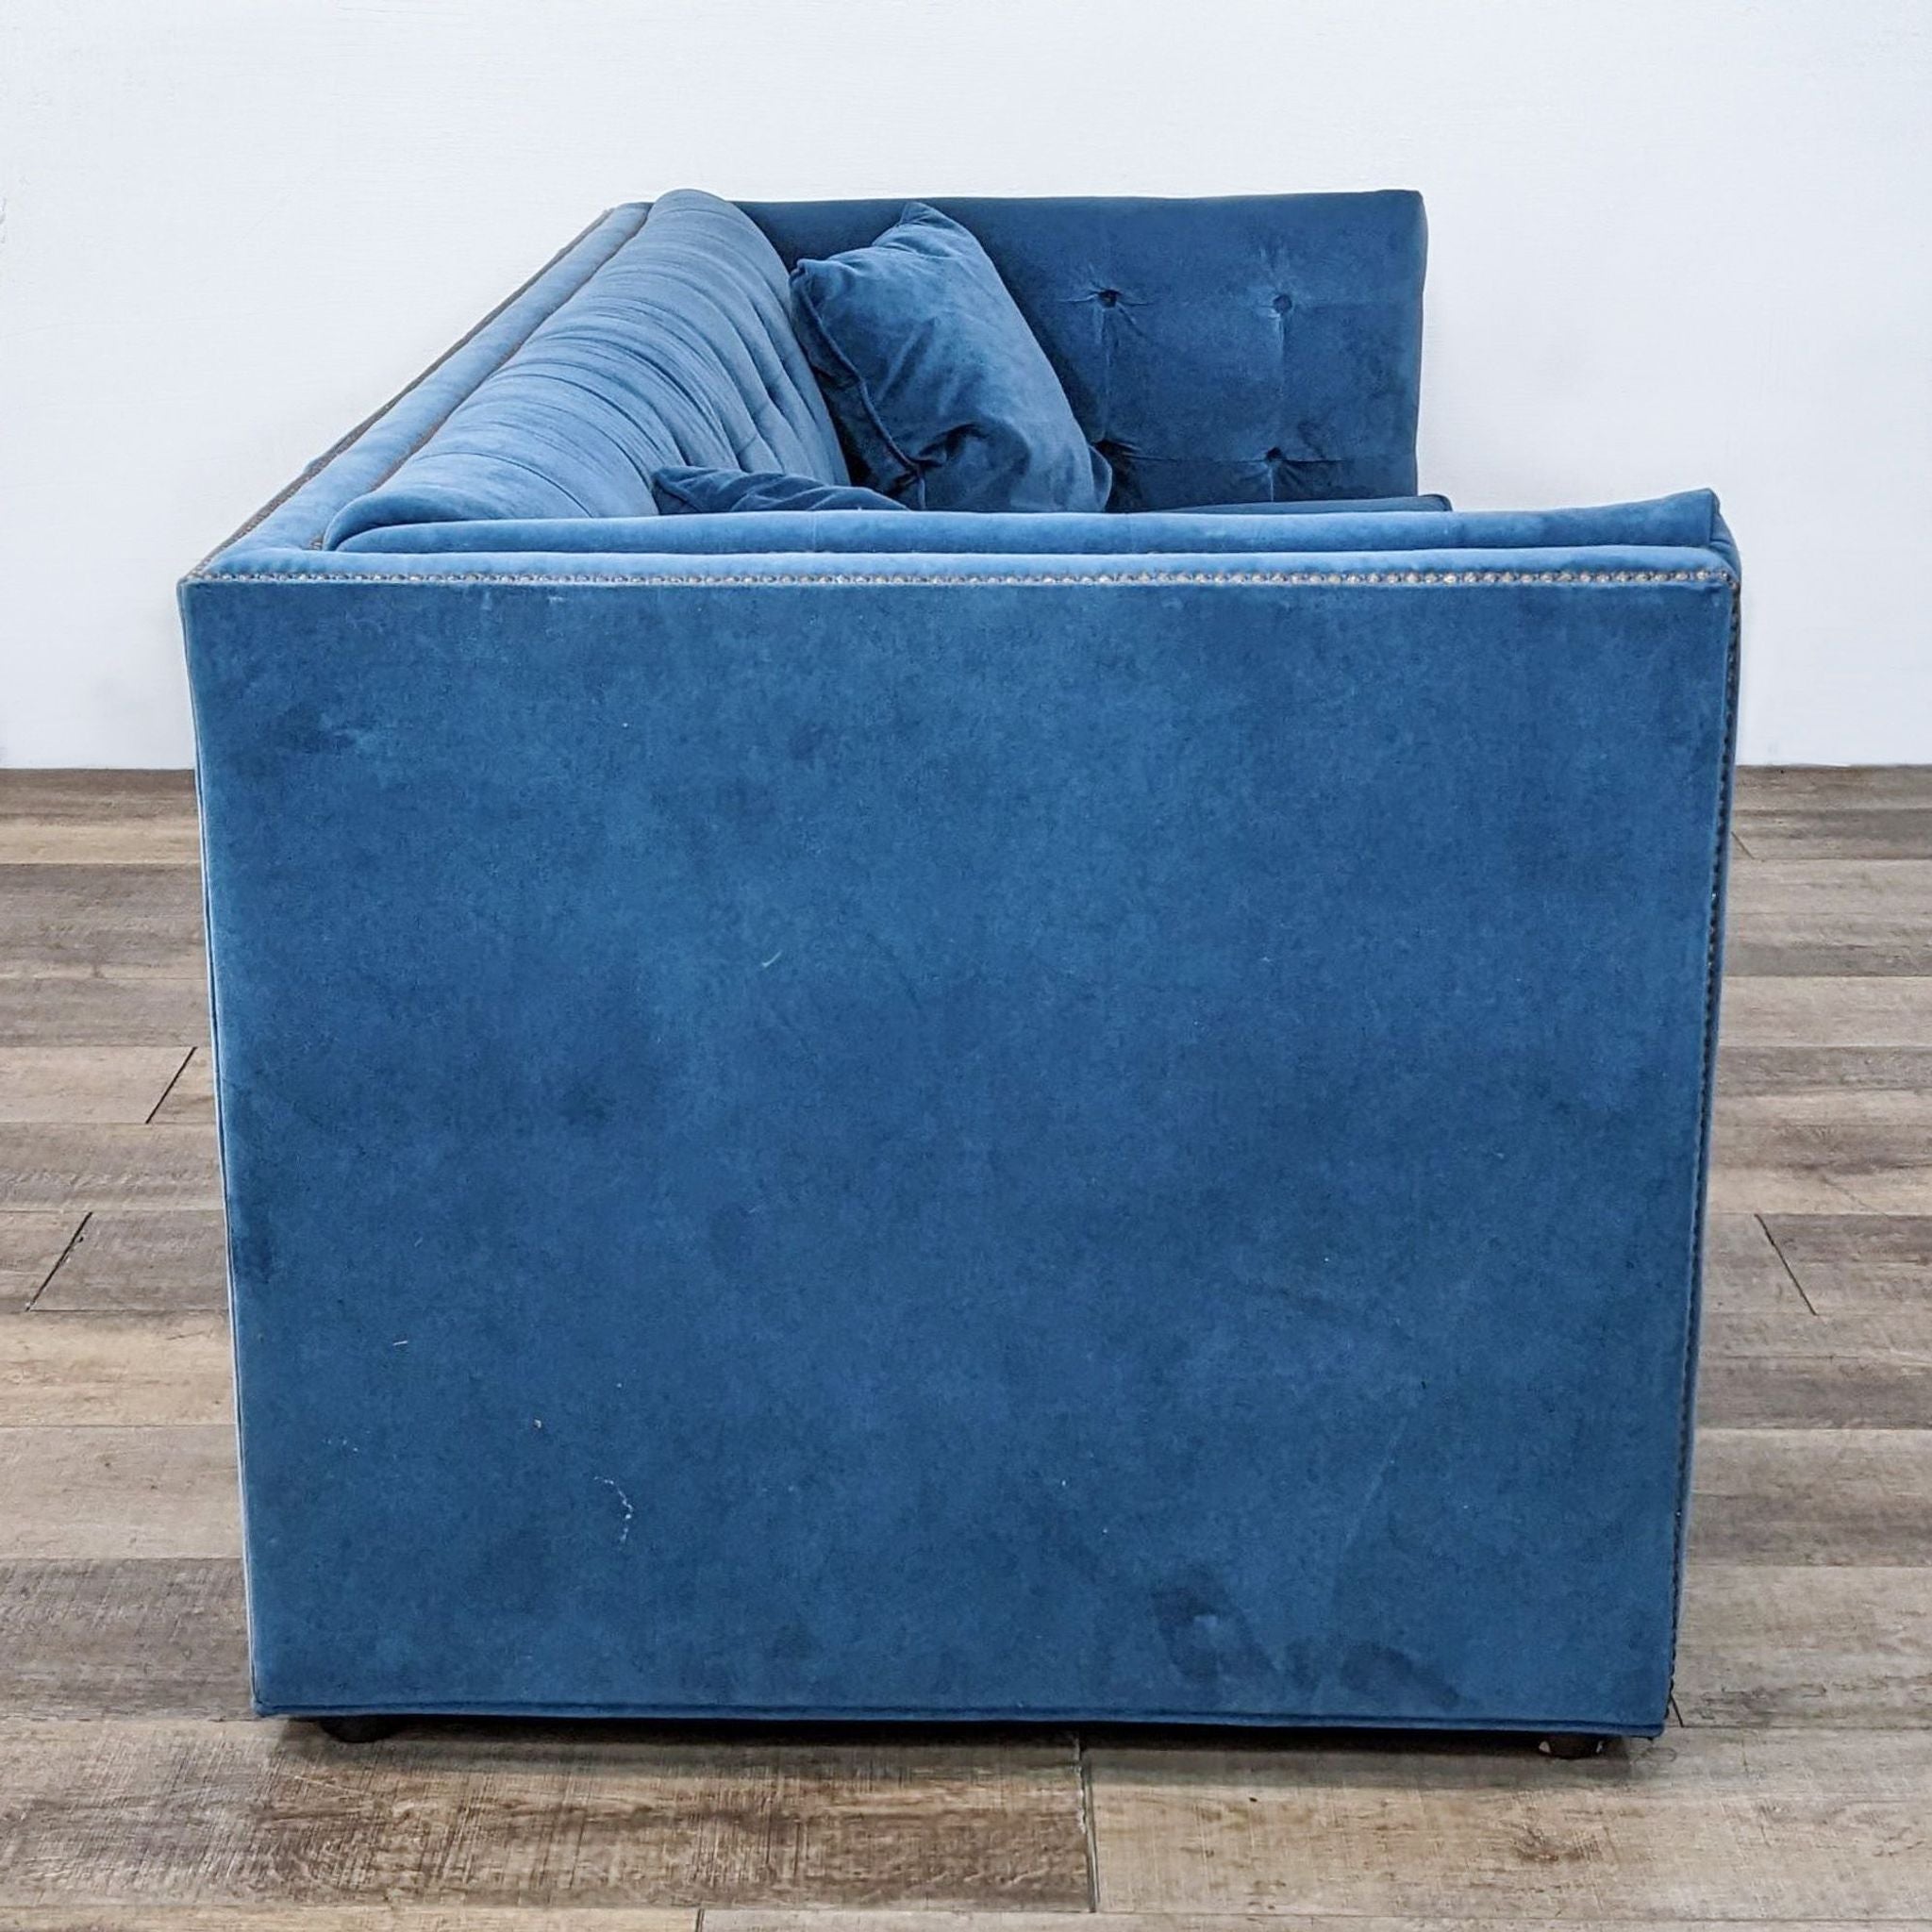 Front-facing view of a blue Bassett 3-seat sofa with tufted design and gold nail head accents on a wood floor.